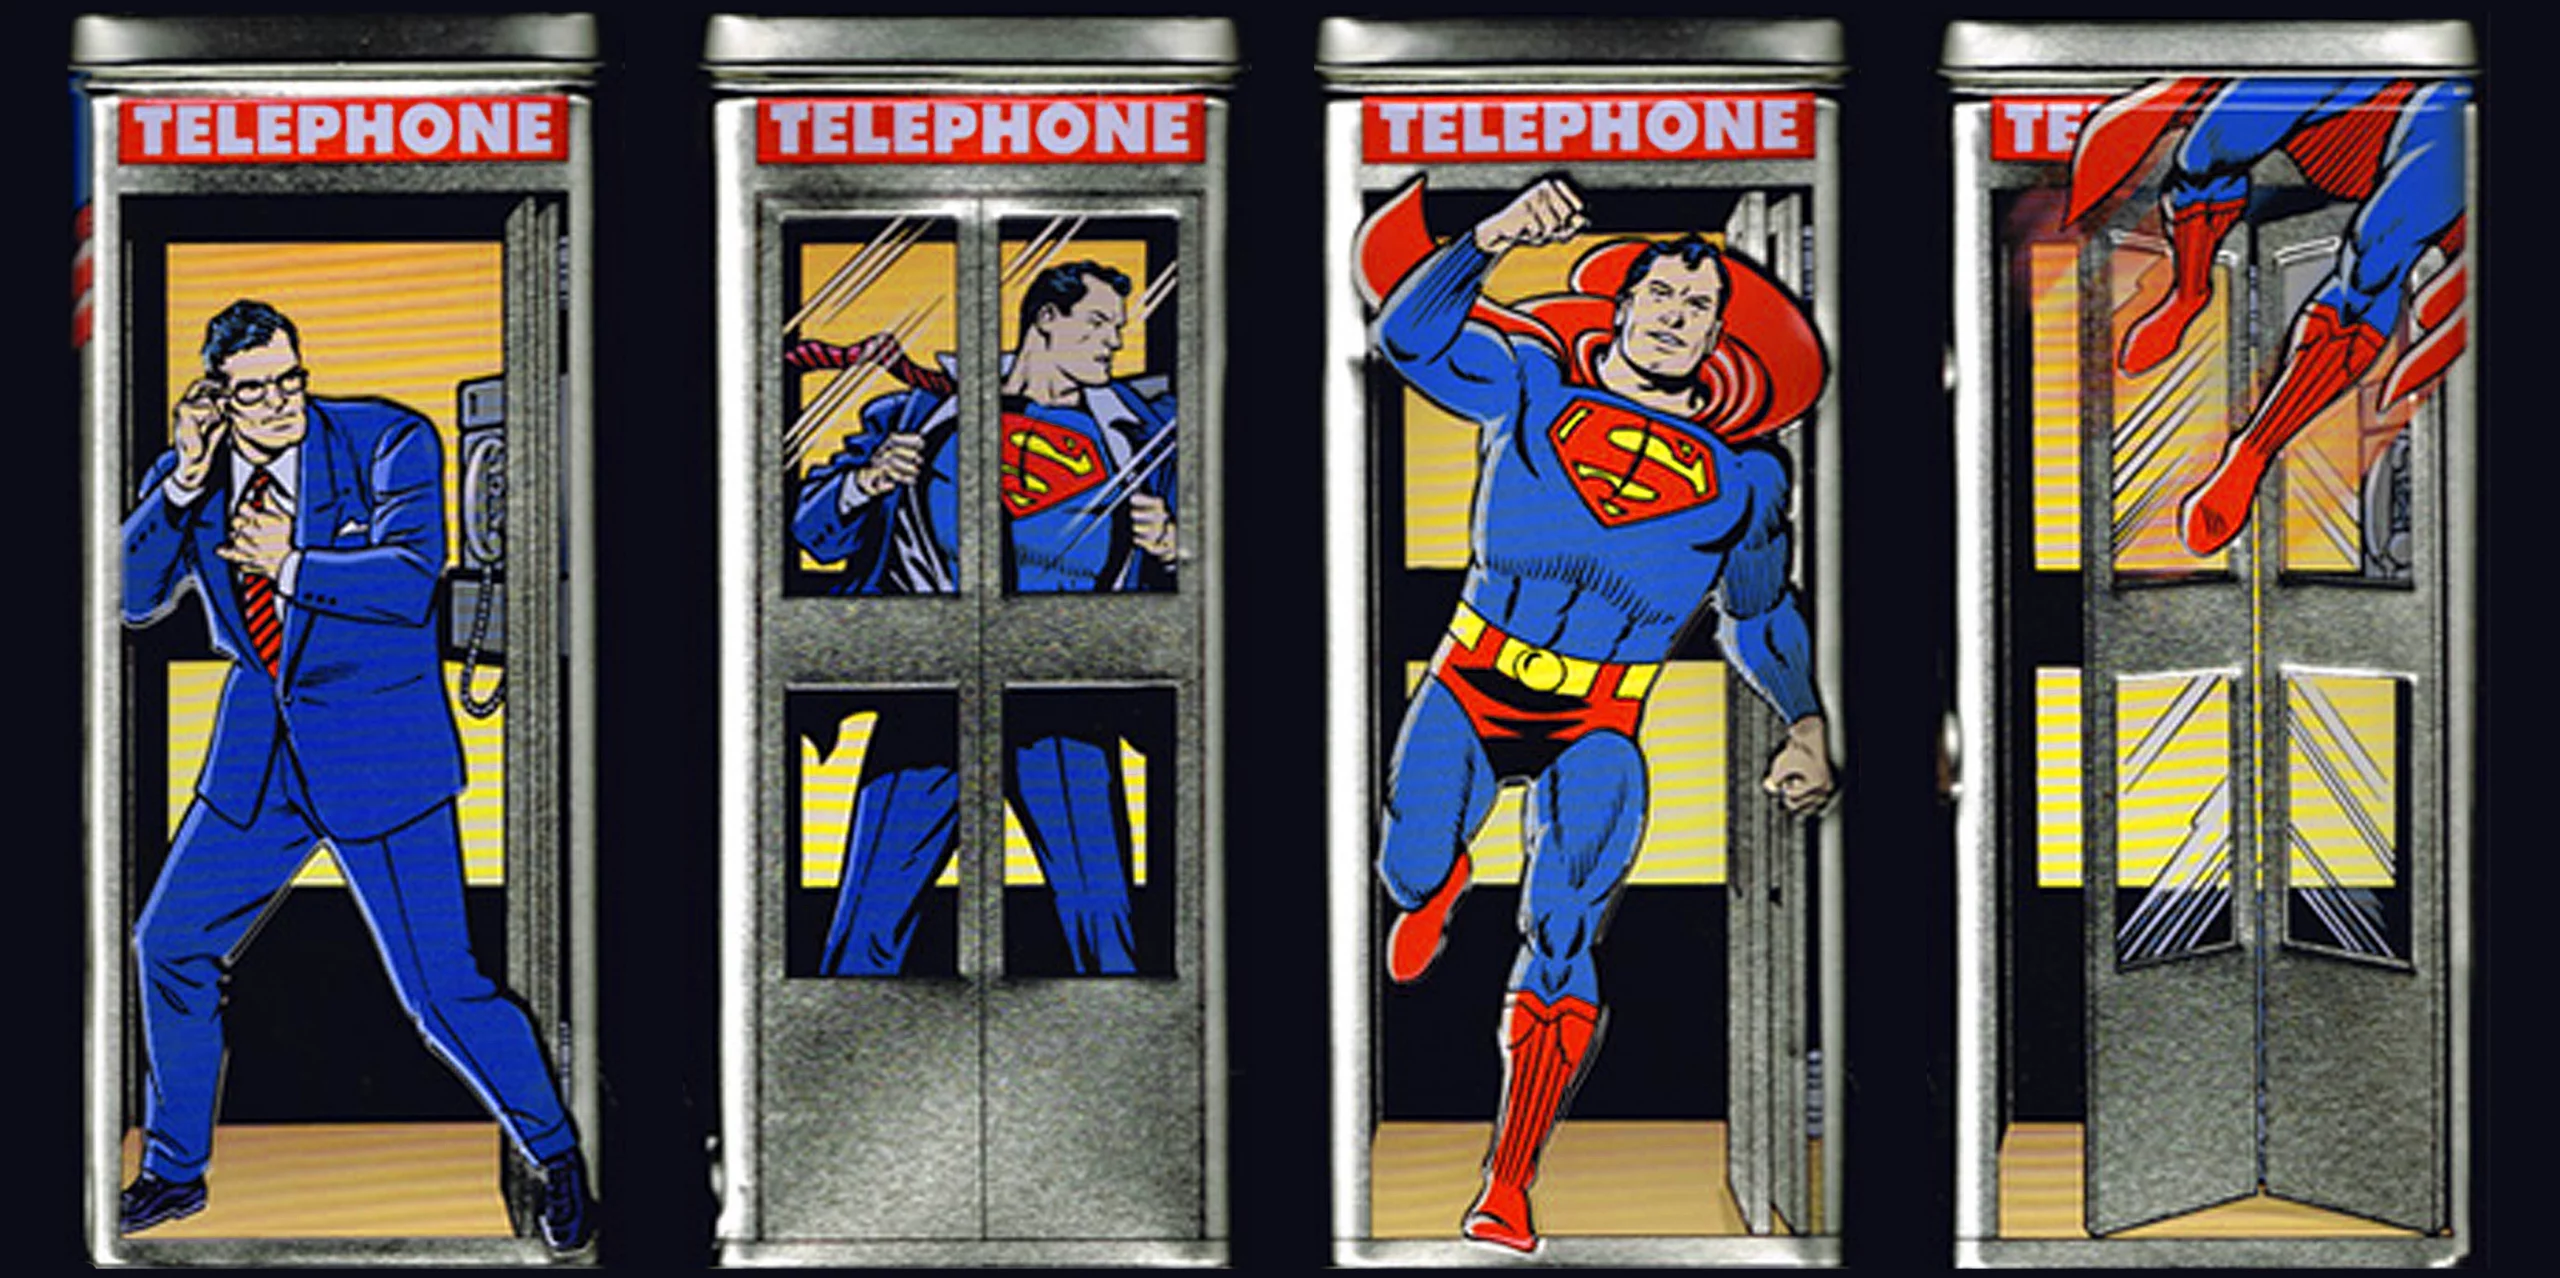 Product Comparison: Which Entry-Level Phone Booth is the Best Value for Money?